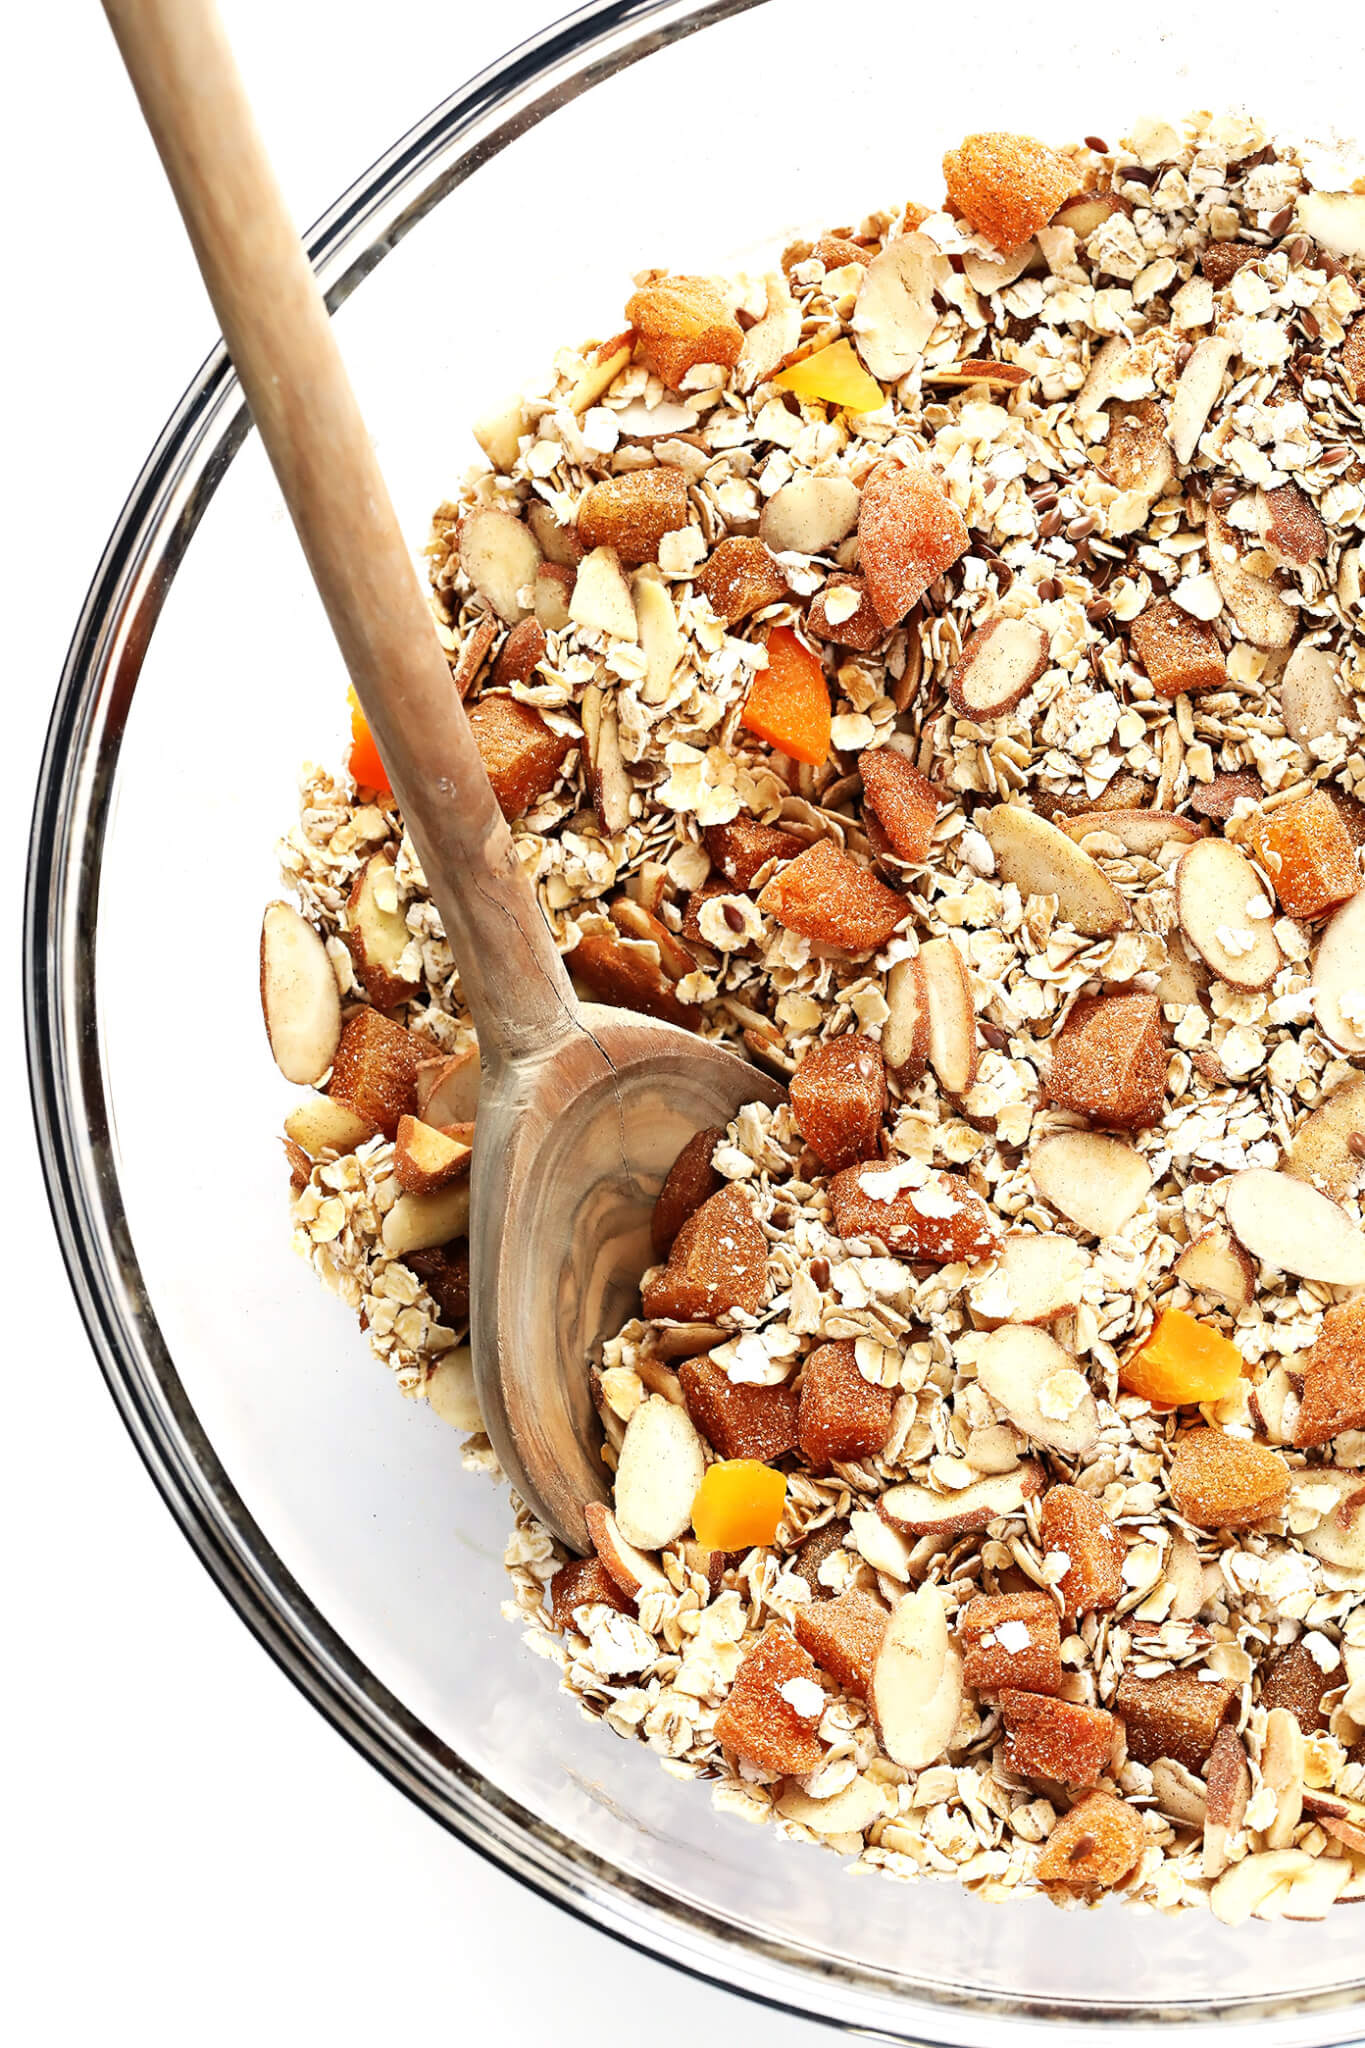 This delicious 5-Minute Instant Oatmeal Mix is full of feel-good ingredients, it's easy to make, and makes the perfect flavorful breakfast you can feel good about! This recipe uses dried apricots (or any fruit), almonds (or any nuts), oats, cinnamon, and flaxseeds. So simple! | gimmesomeoven.com